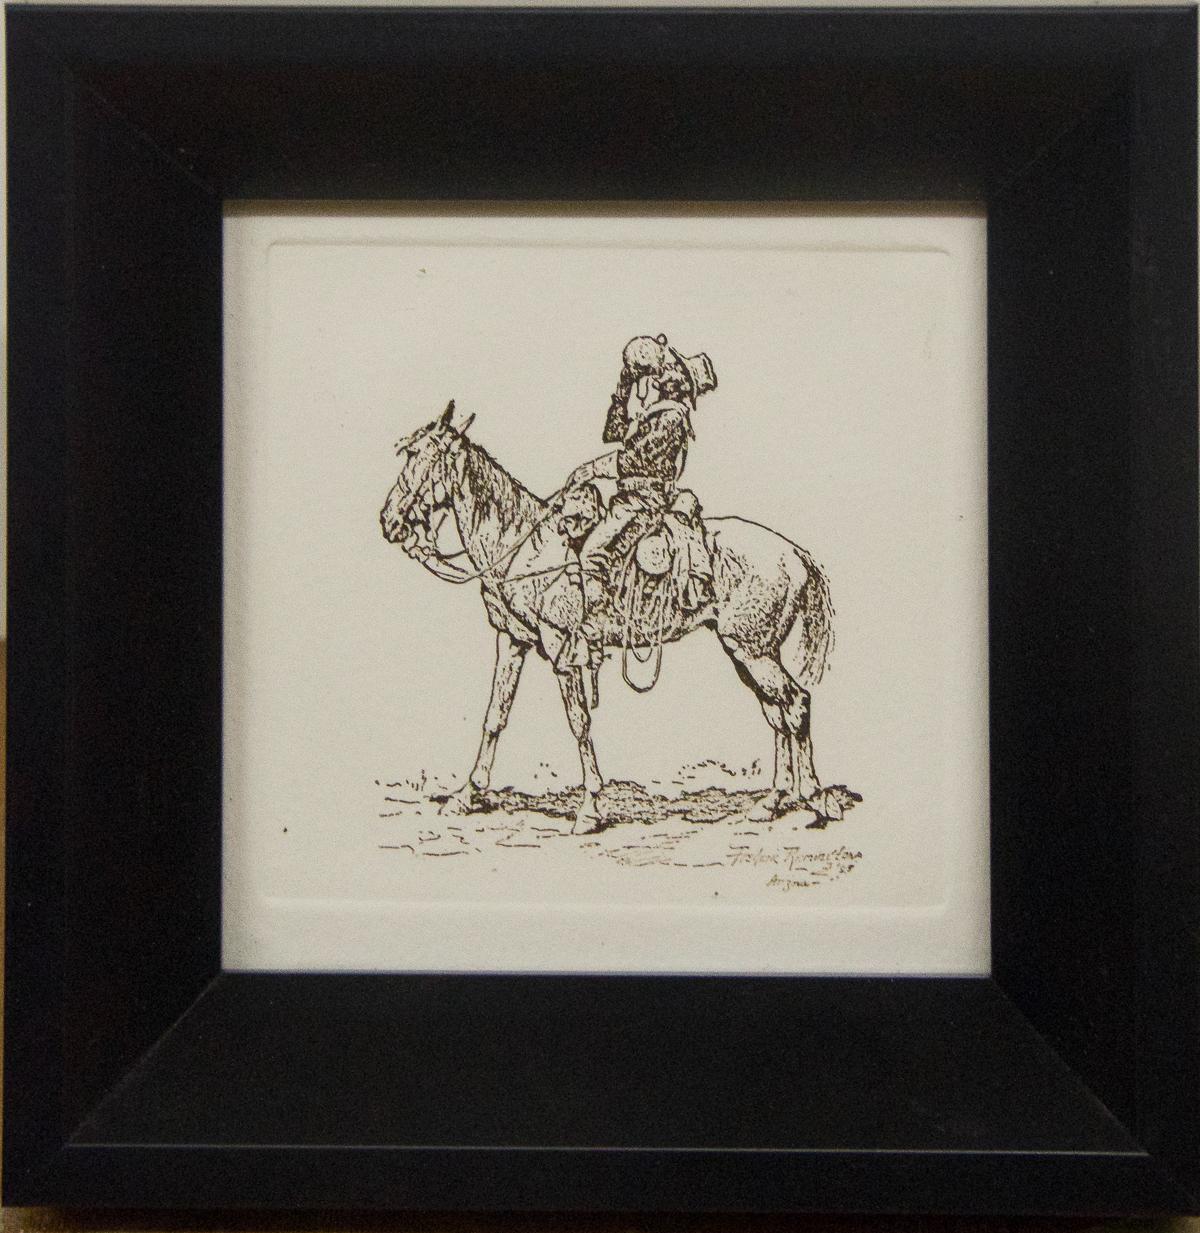 (after) Frederic Remington Animal Print - "Set of Four Remington Etchings" Framed, (Title Unknown) Framed, Plate Signed